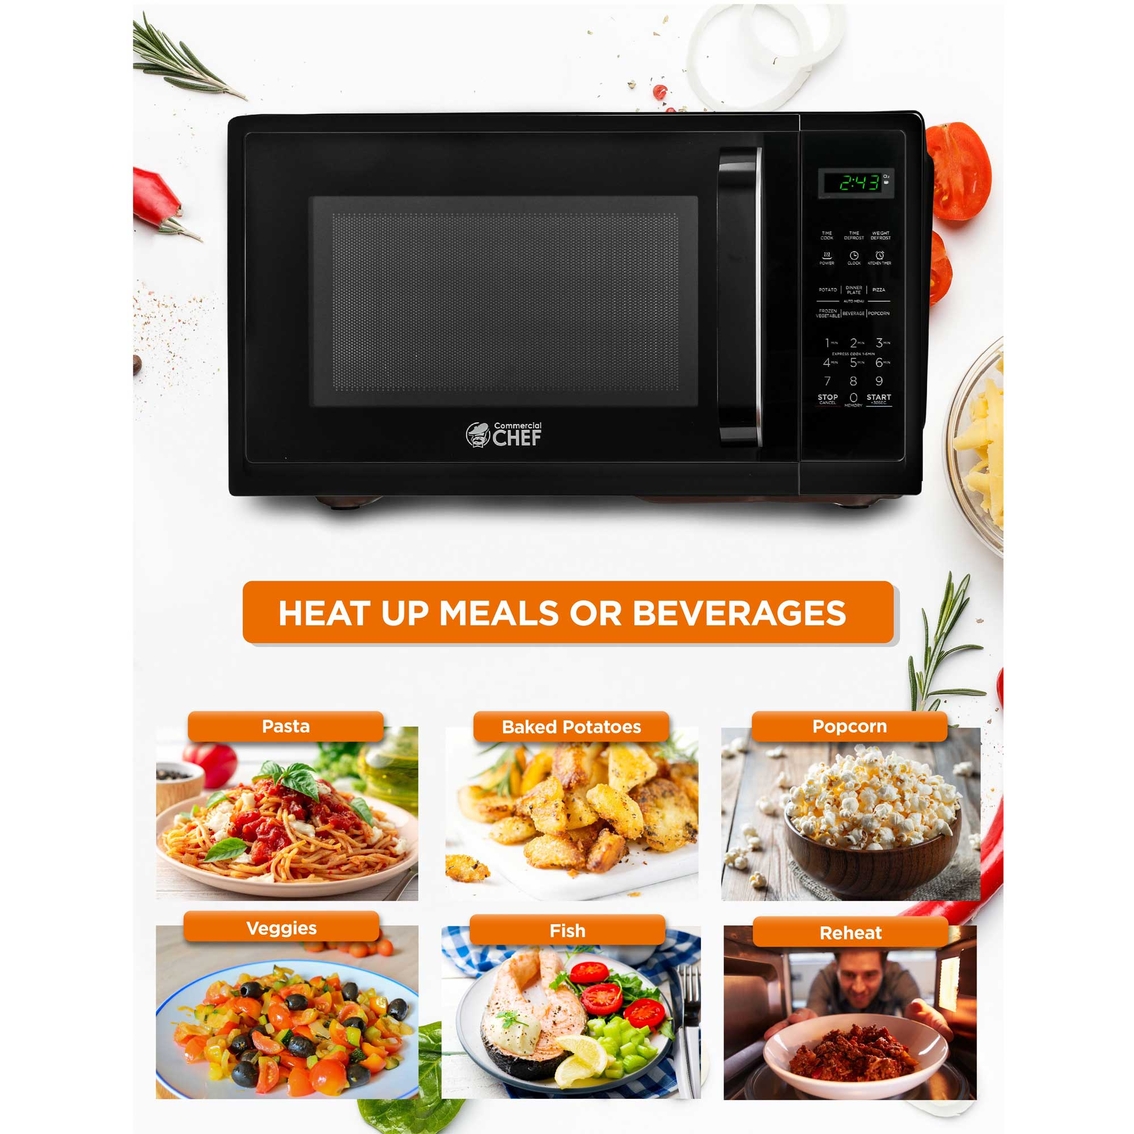 Commercial Chef 0.9 Cu. Ft. Countertop Microwave Oven - Image 2 of 7